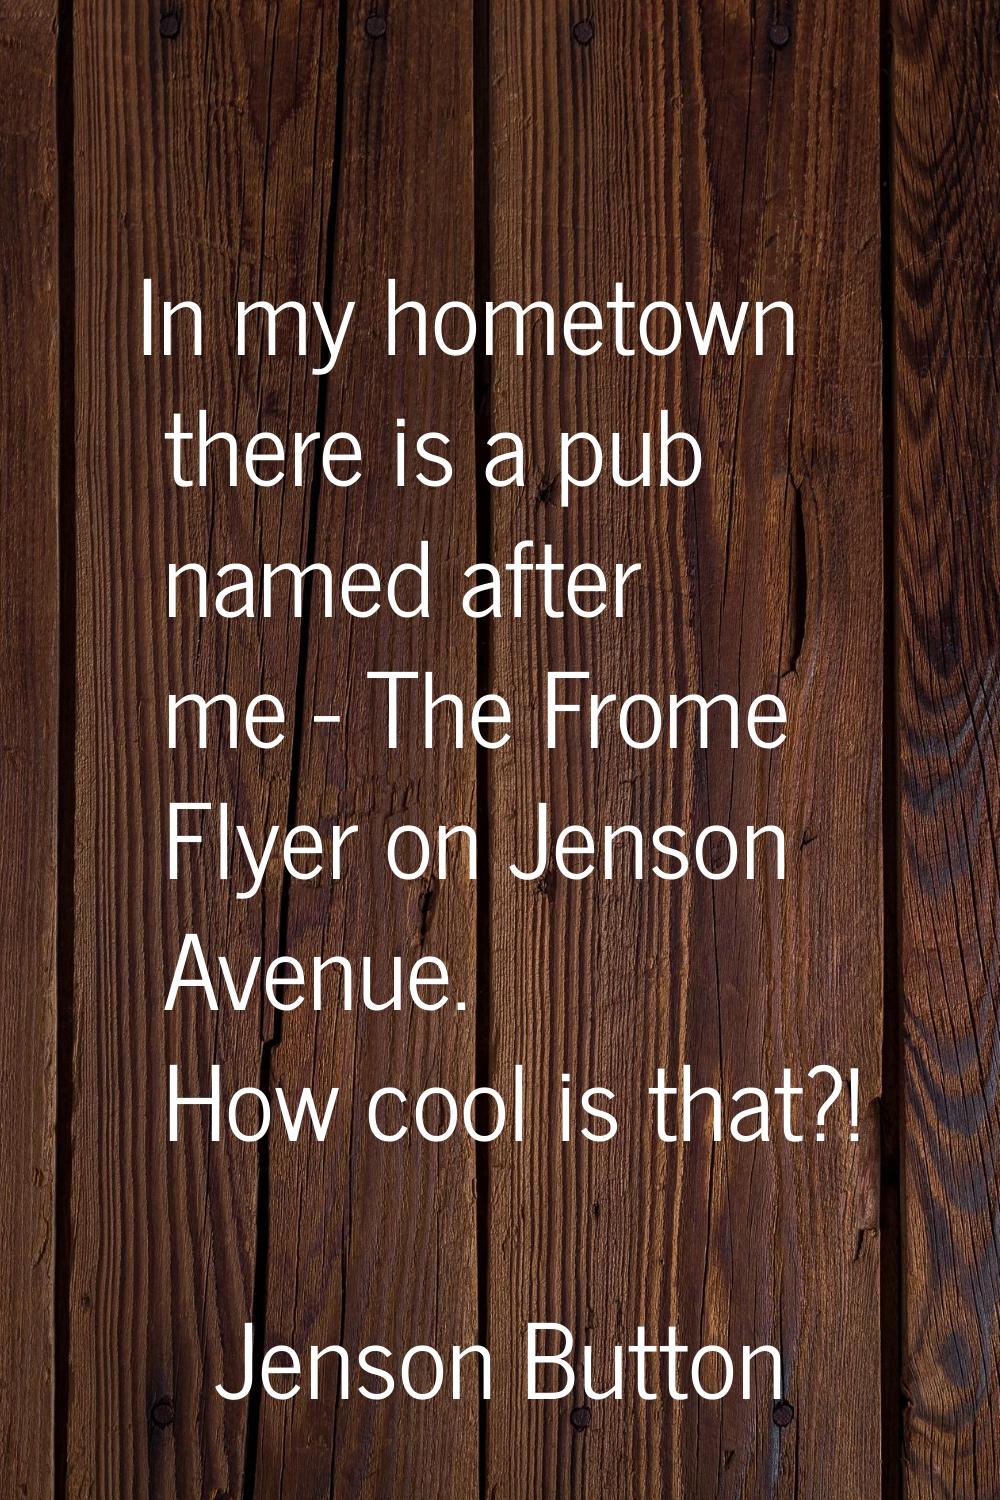 In my hometown there is a pub named after me - The Frome Flyer on Jenson Avenue. How cool is that?!